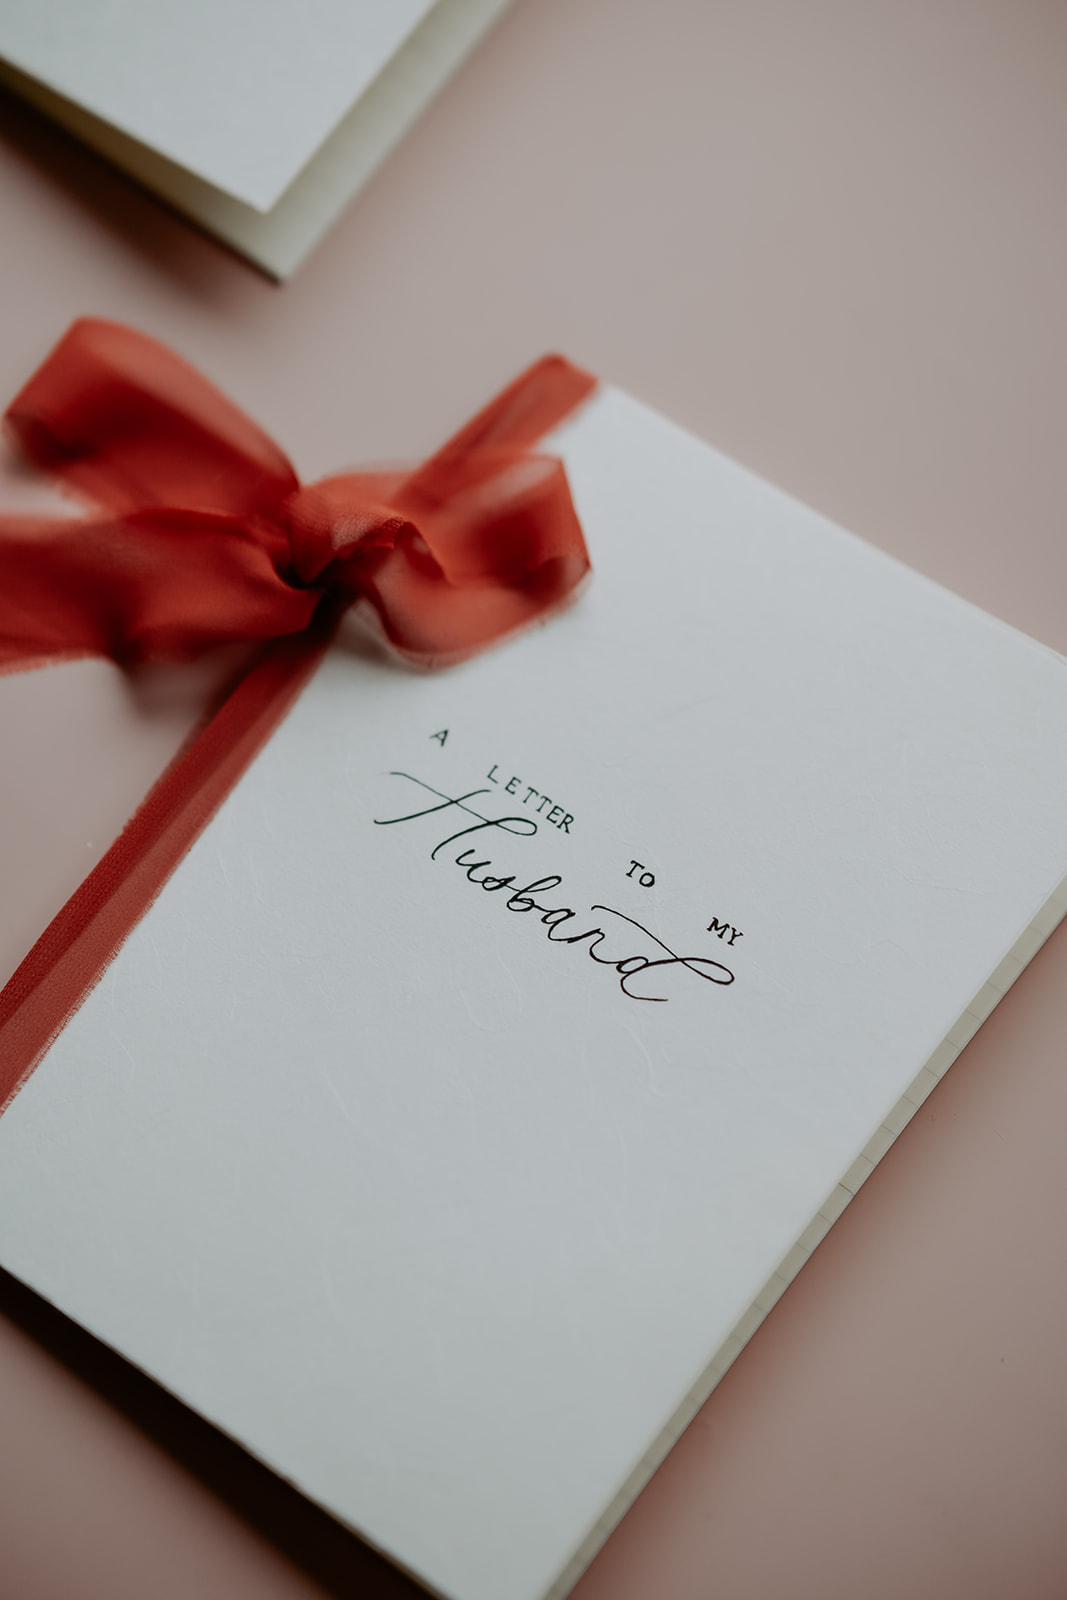 A letter with the handwritten words "a letter to my husband" beside a white gift box with a red ribbon.